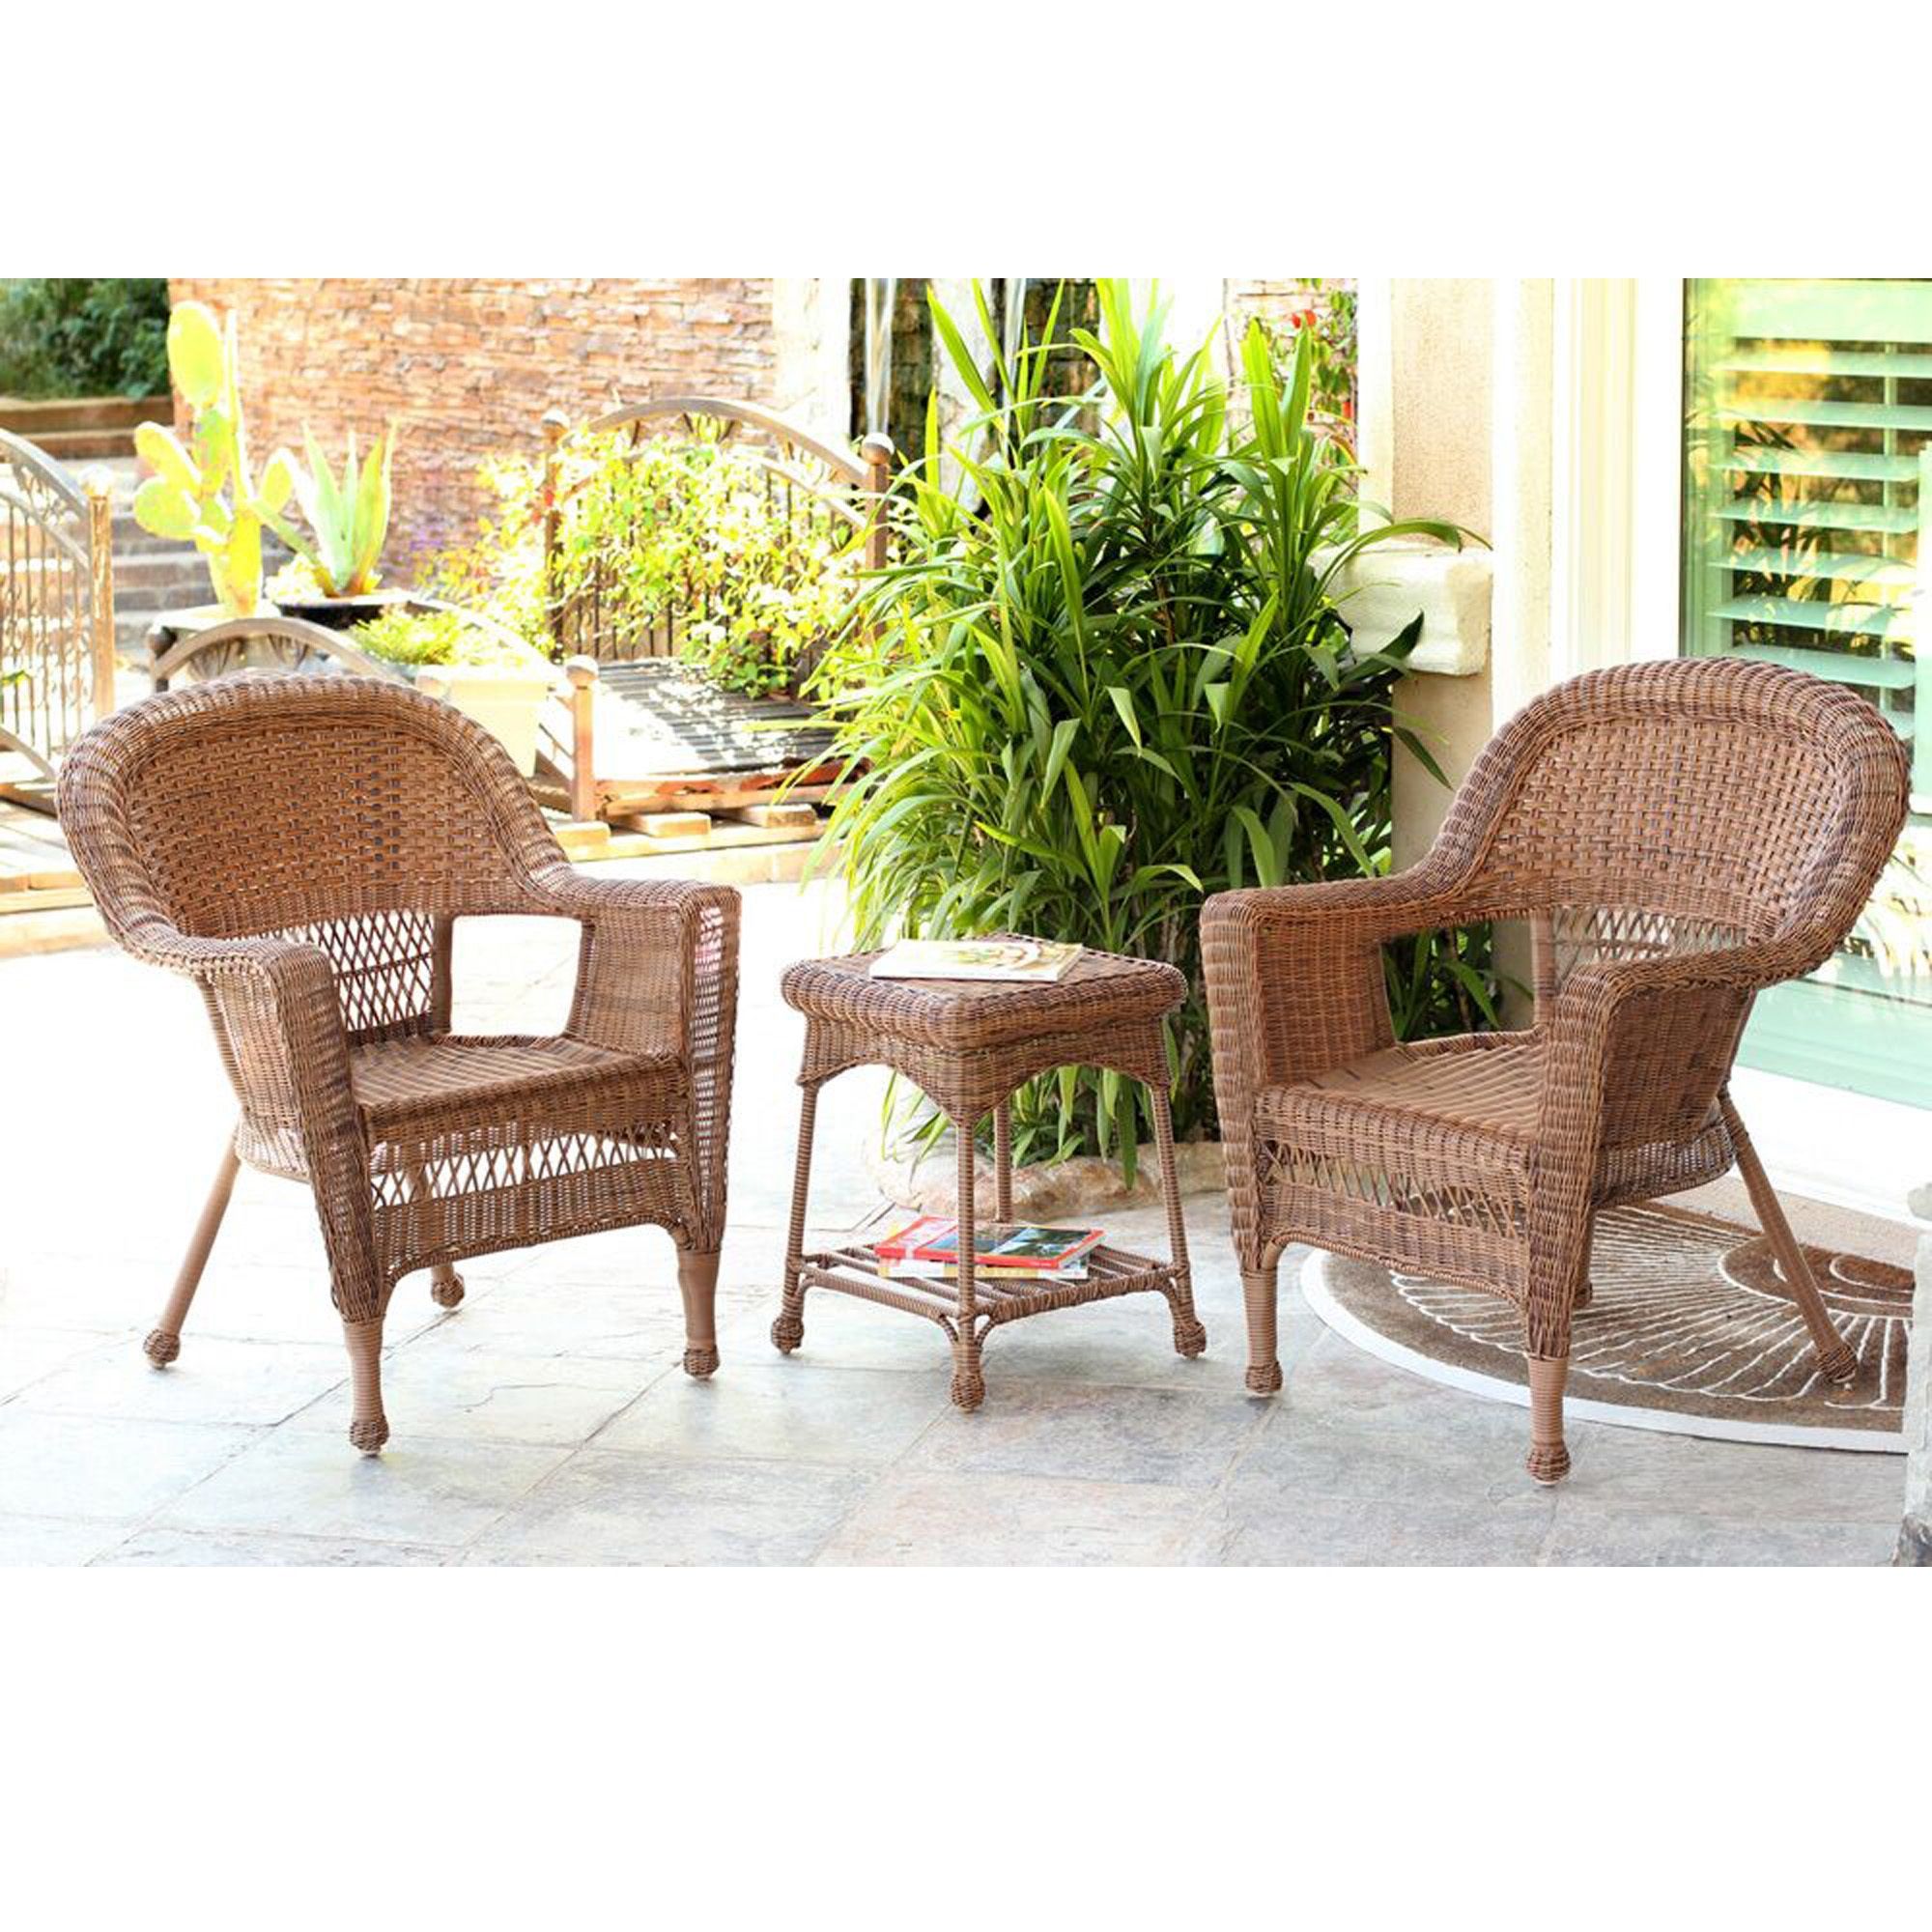 Set Of 3 Honey Brown Resin Wicker Patio Chairs And End Table Furniture Intended For Rattan Wicker Outdoor Seating Sets (View 11 of 15)